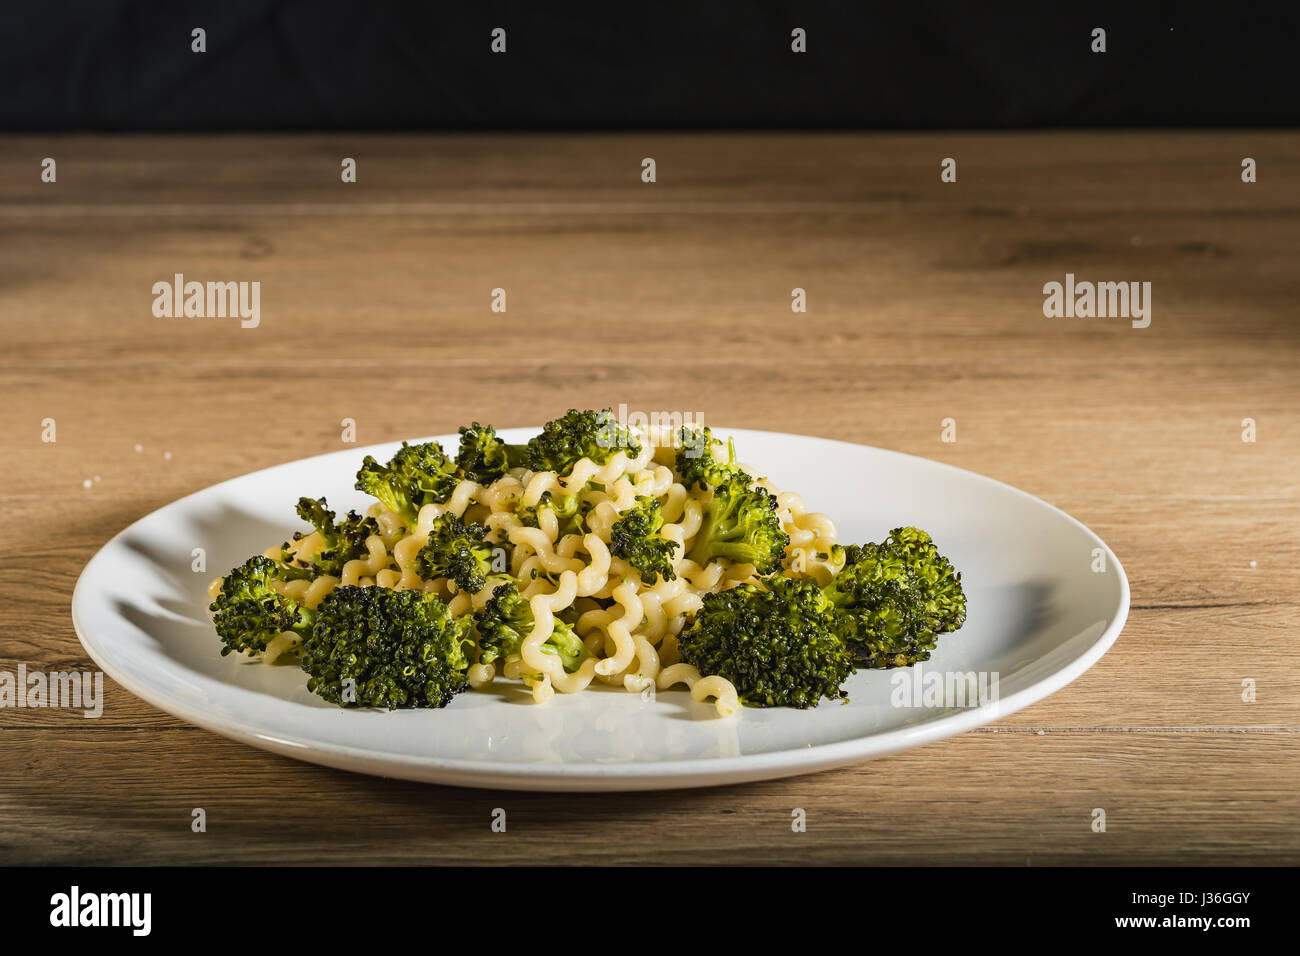 Long pasta dish with broccoli from below Stock Photo